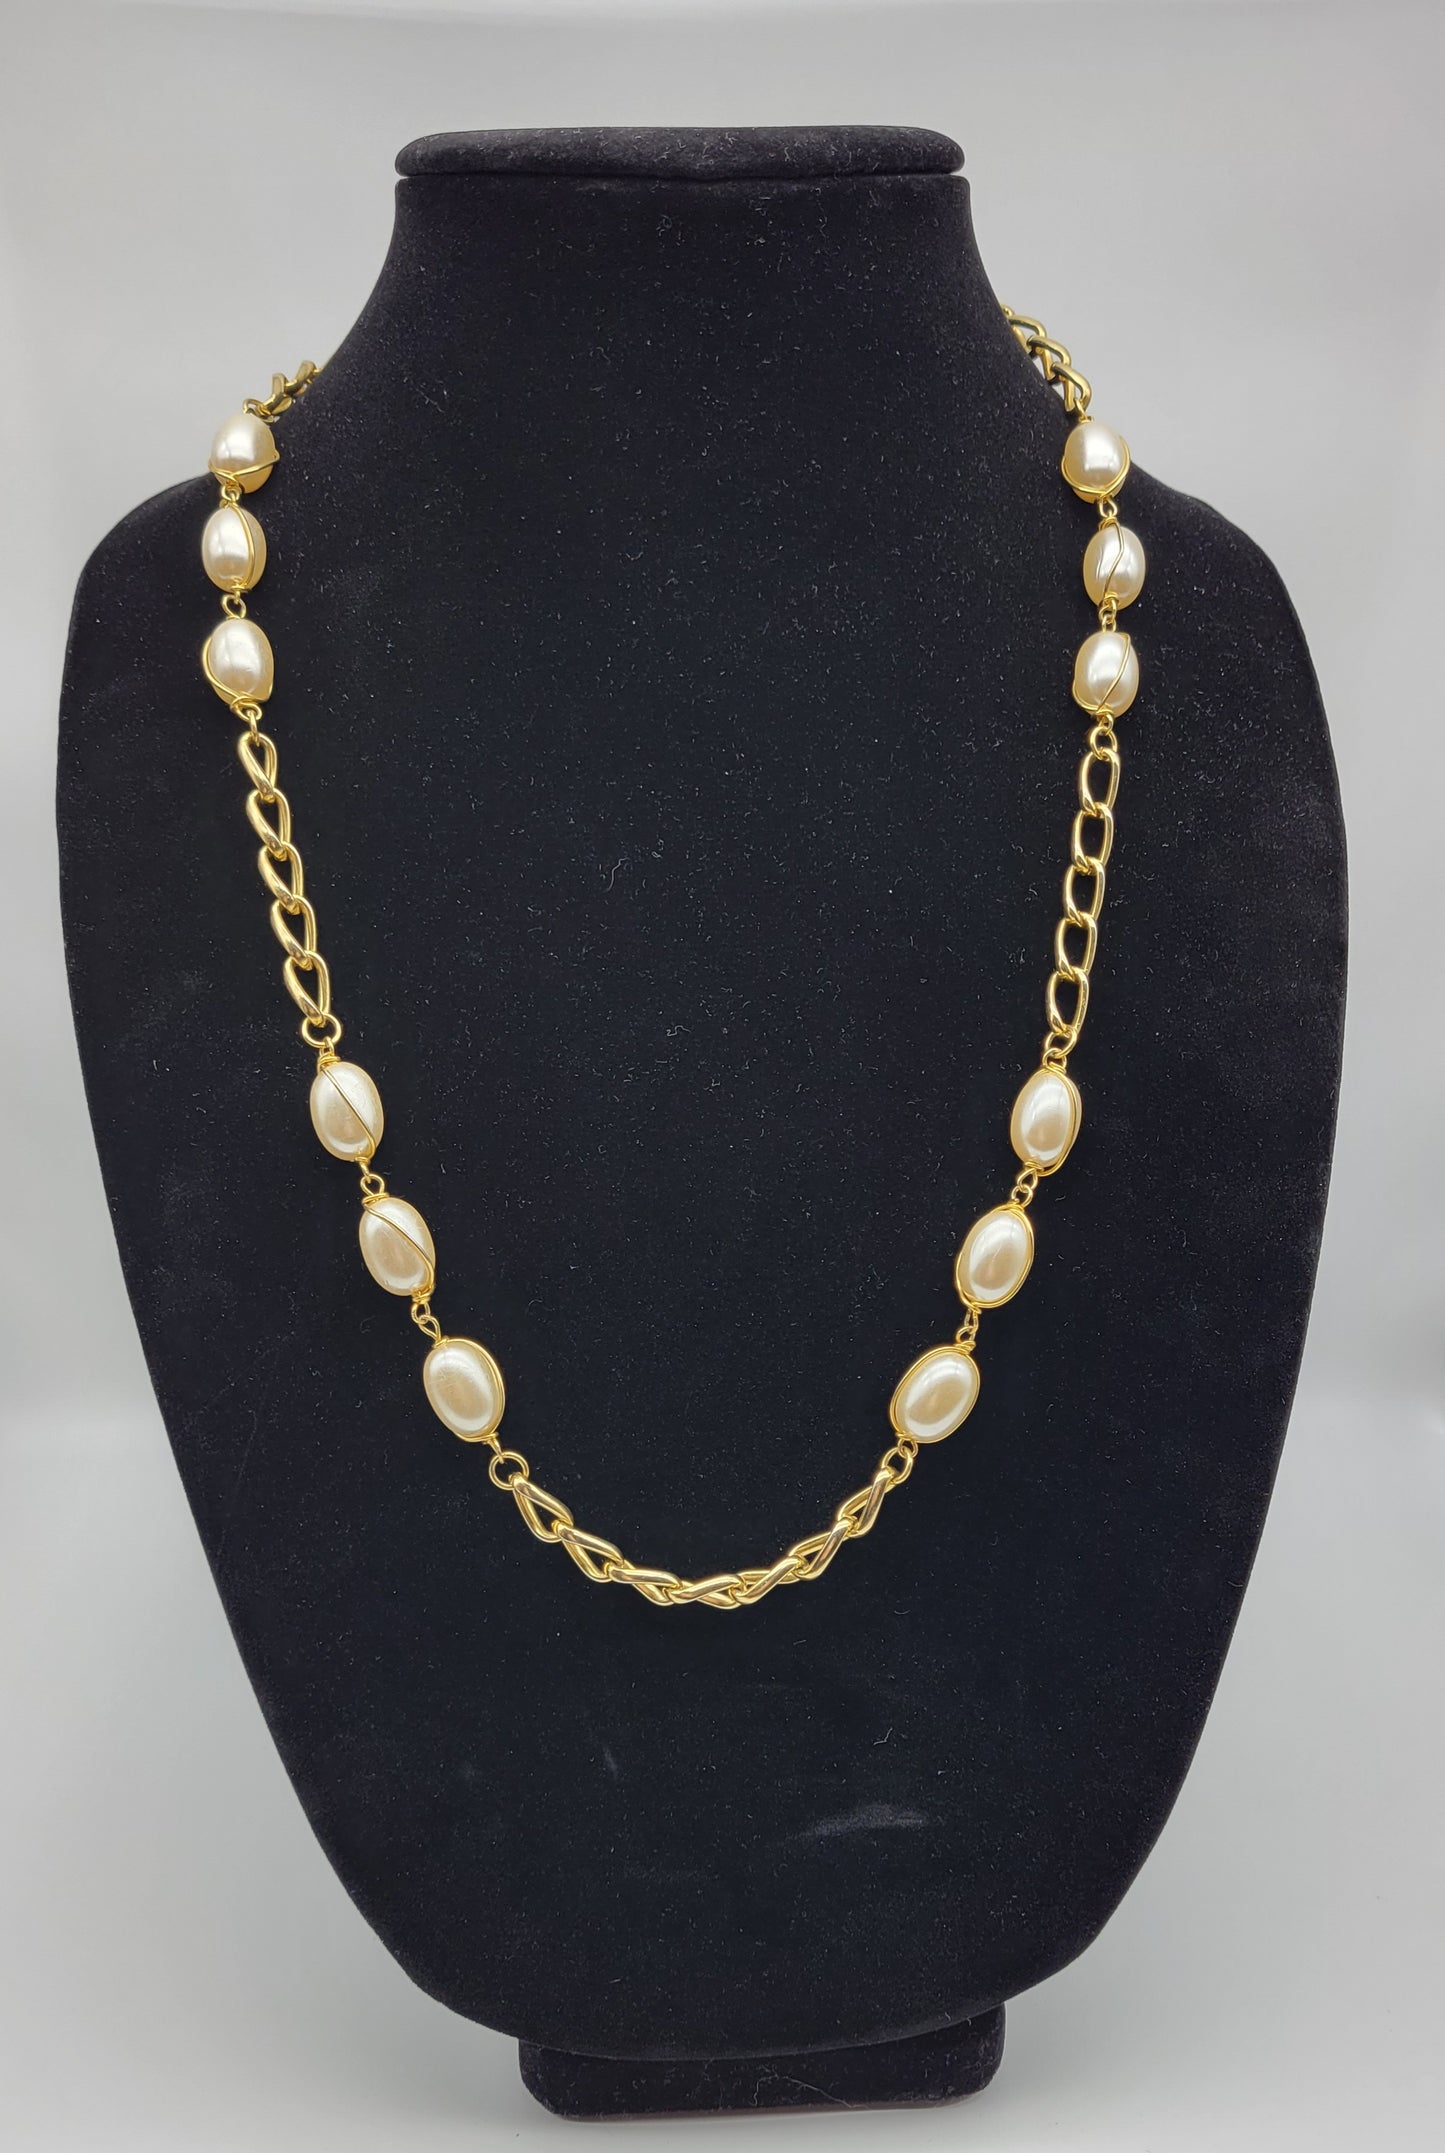 "Swirls and Pearls" Necklace